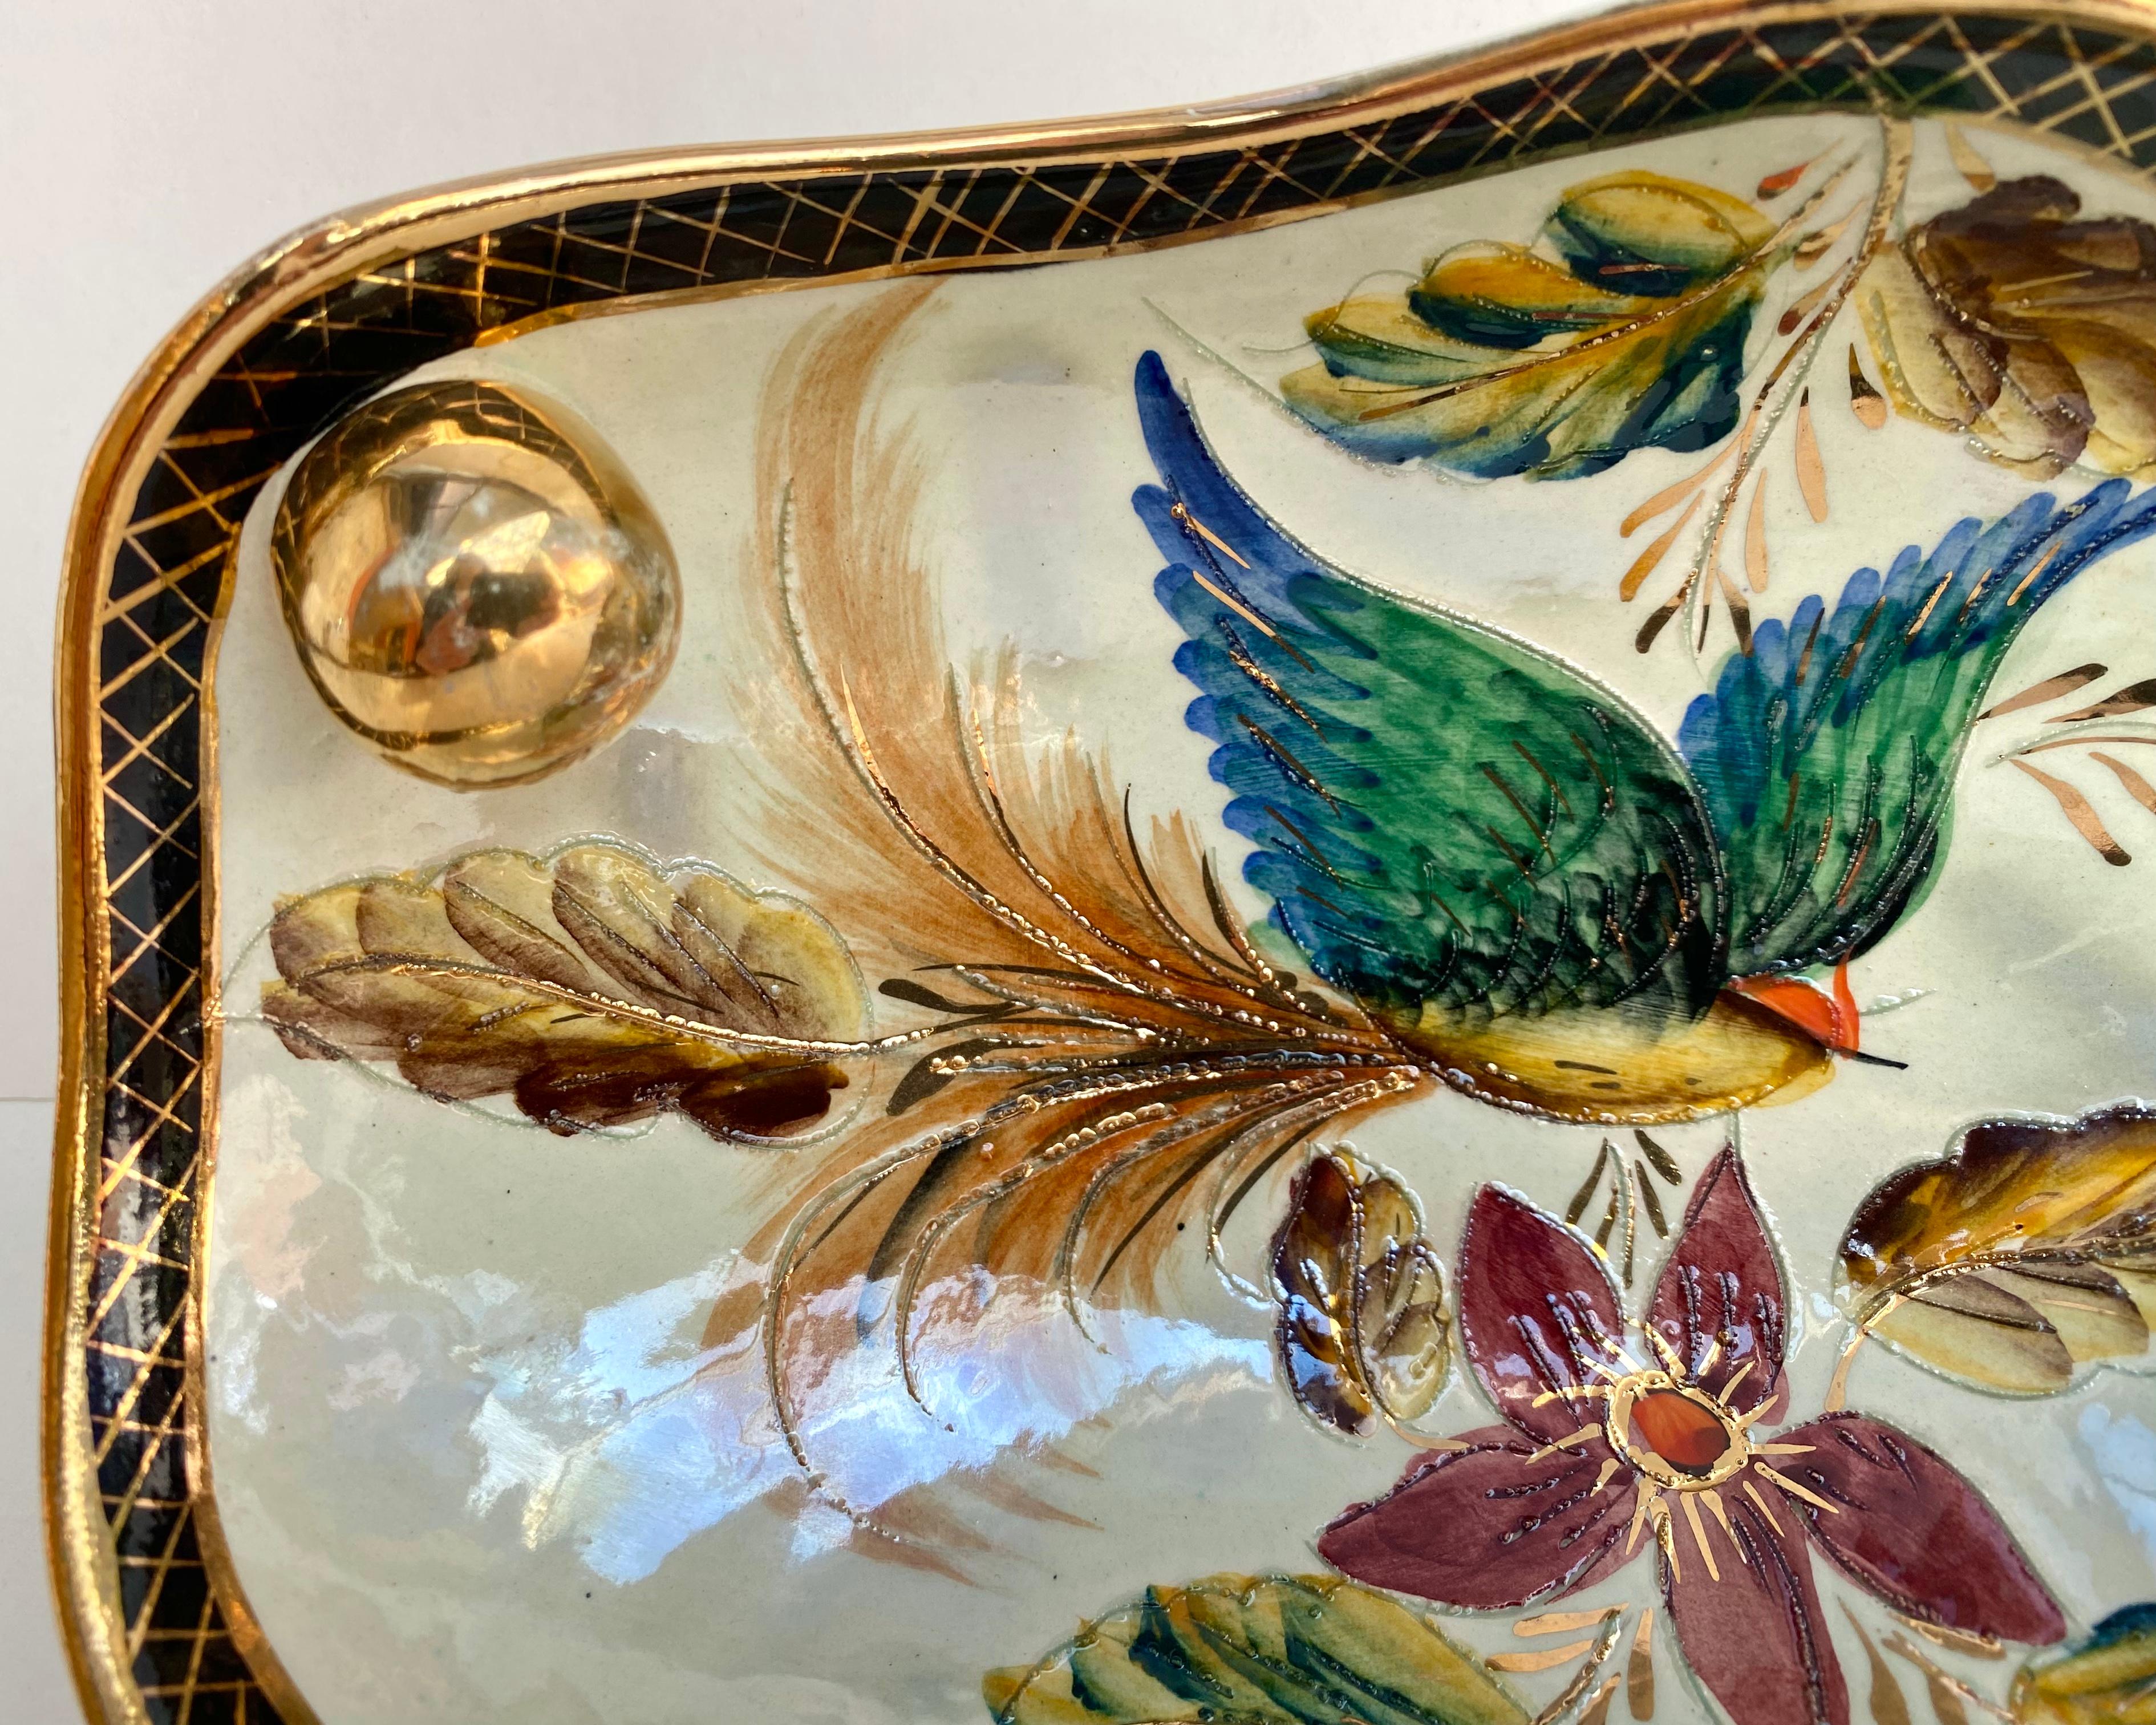 Vintage H. Bequet Quaregnon Design Porcelain Panel with Hand Painted Bird and Leaf Design.

Beautiful decorative plate or wall panel hand made and hand painted, with a bird and leaves by H Bequet from Belgium. 1960s.

The picture has raised gold